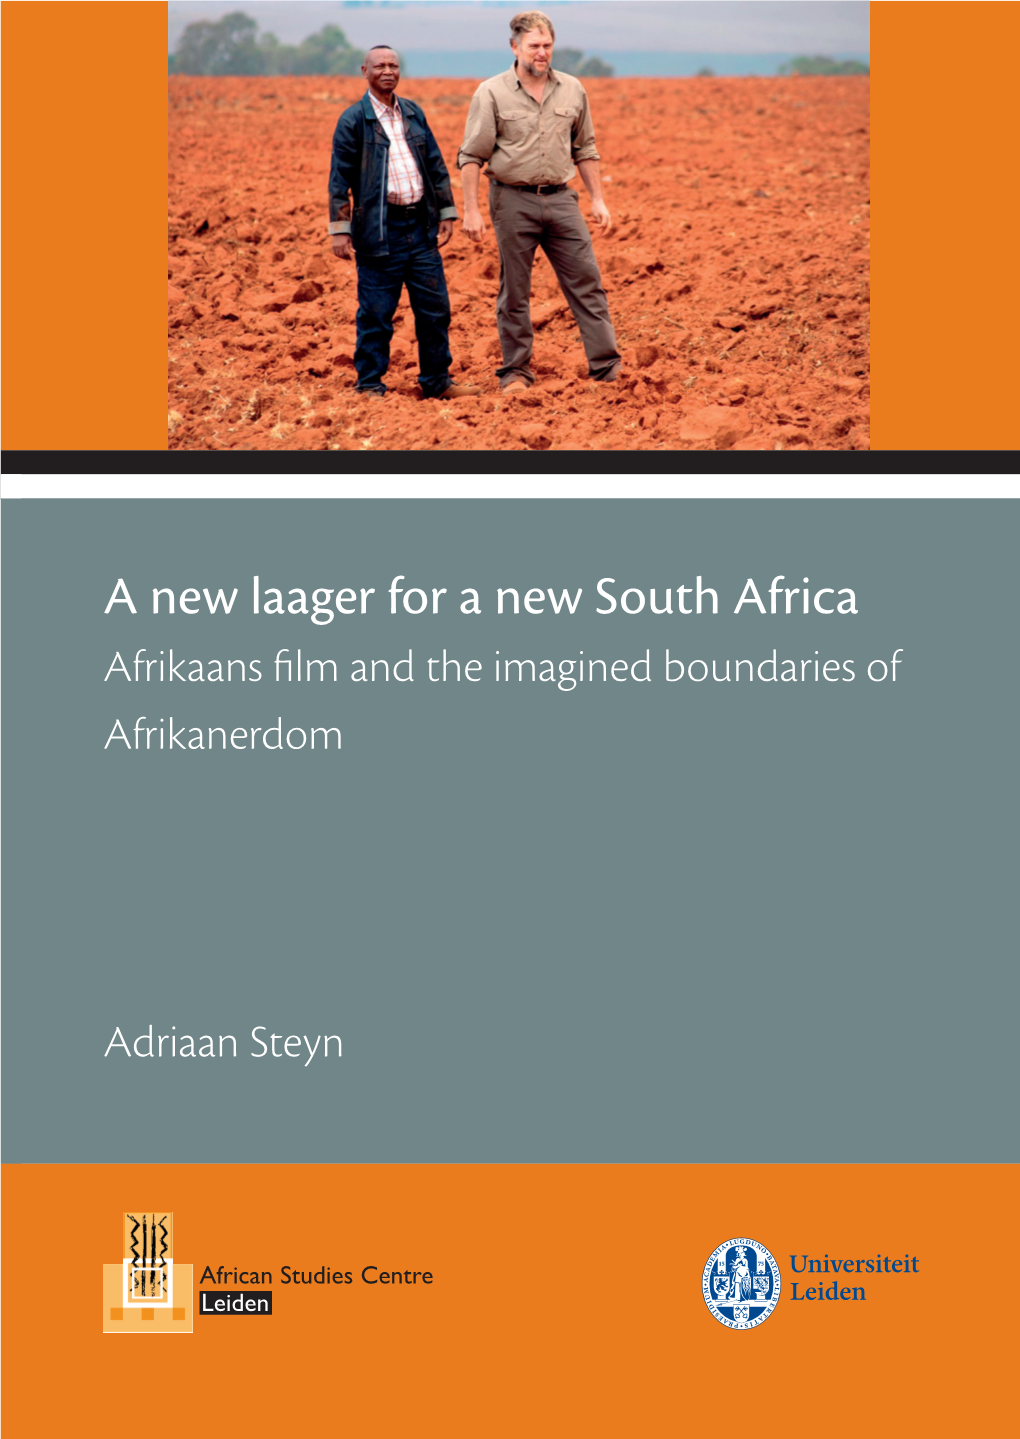 A New Laager for a New South Africa Africa Laager South Fora New a New a New Laager for a New South Africa Afrikaans Film and the Imagined Boundaries of Afrikanerdom